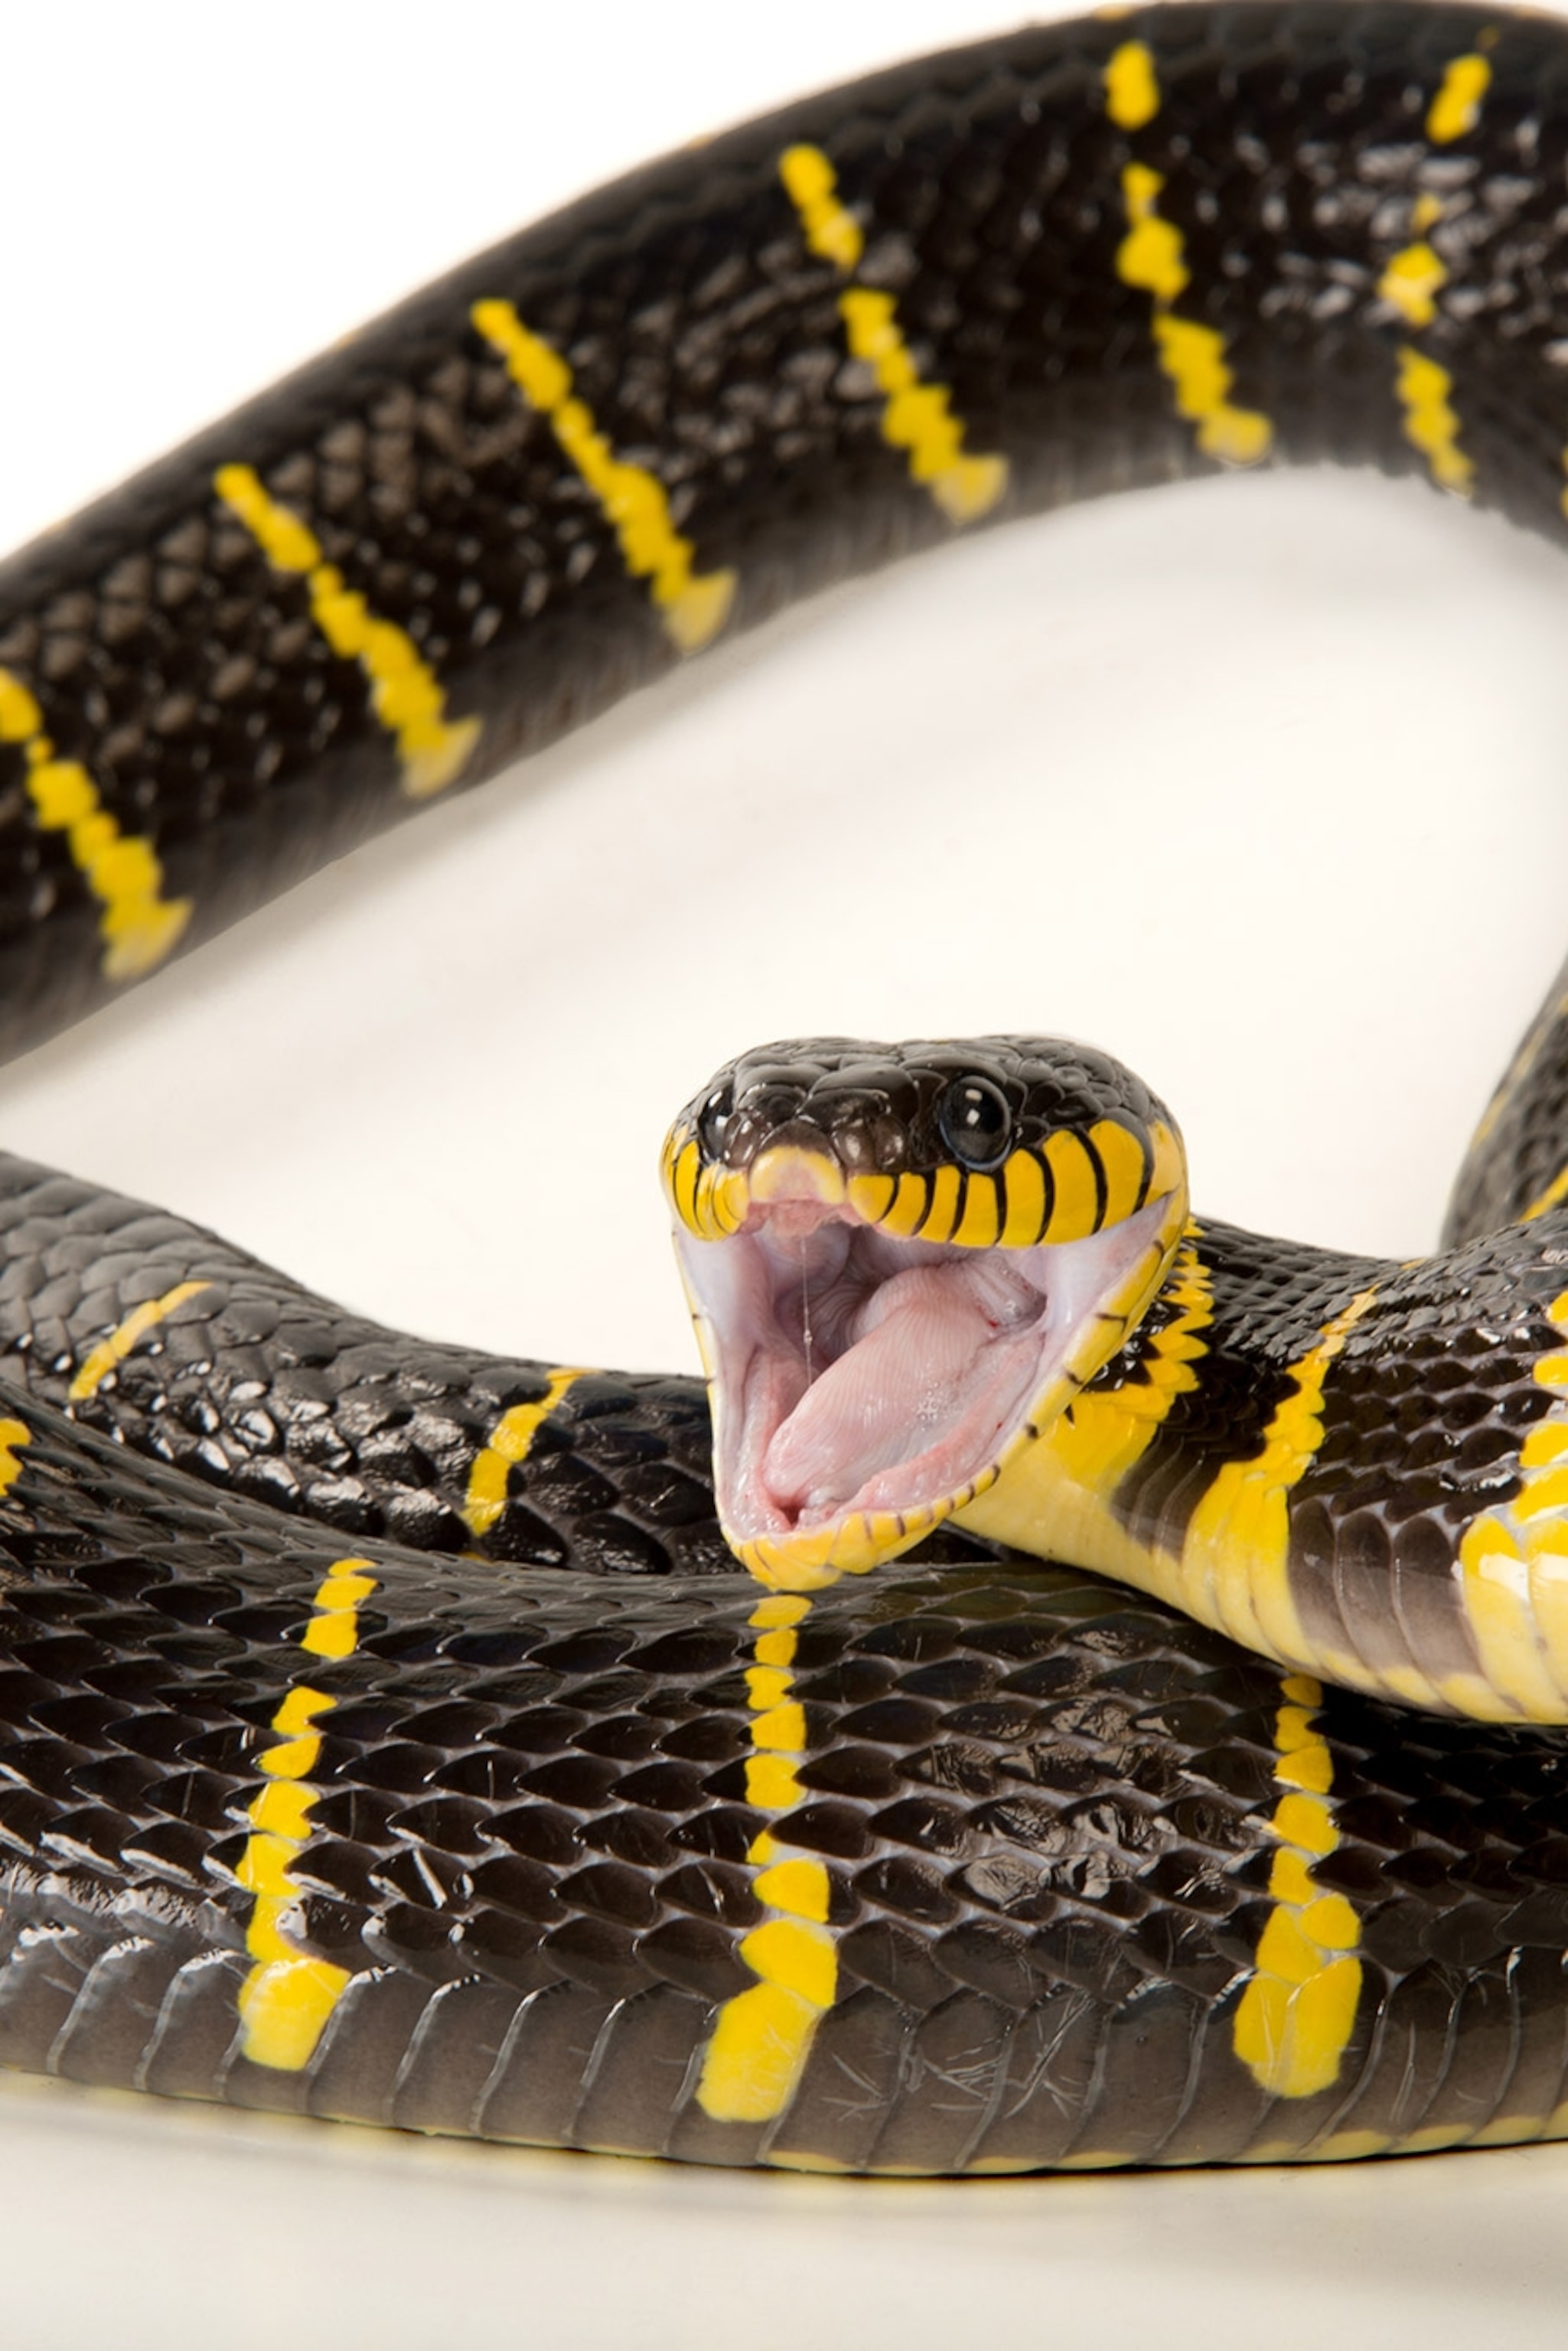 Behavior Of Black And Yellow Snakes